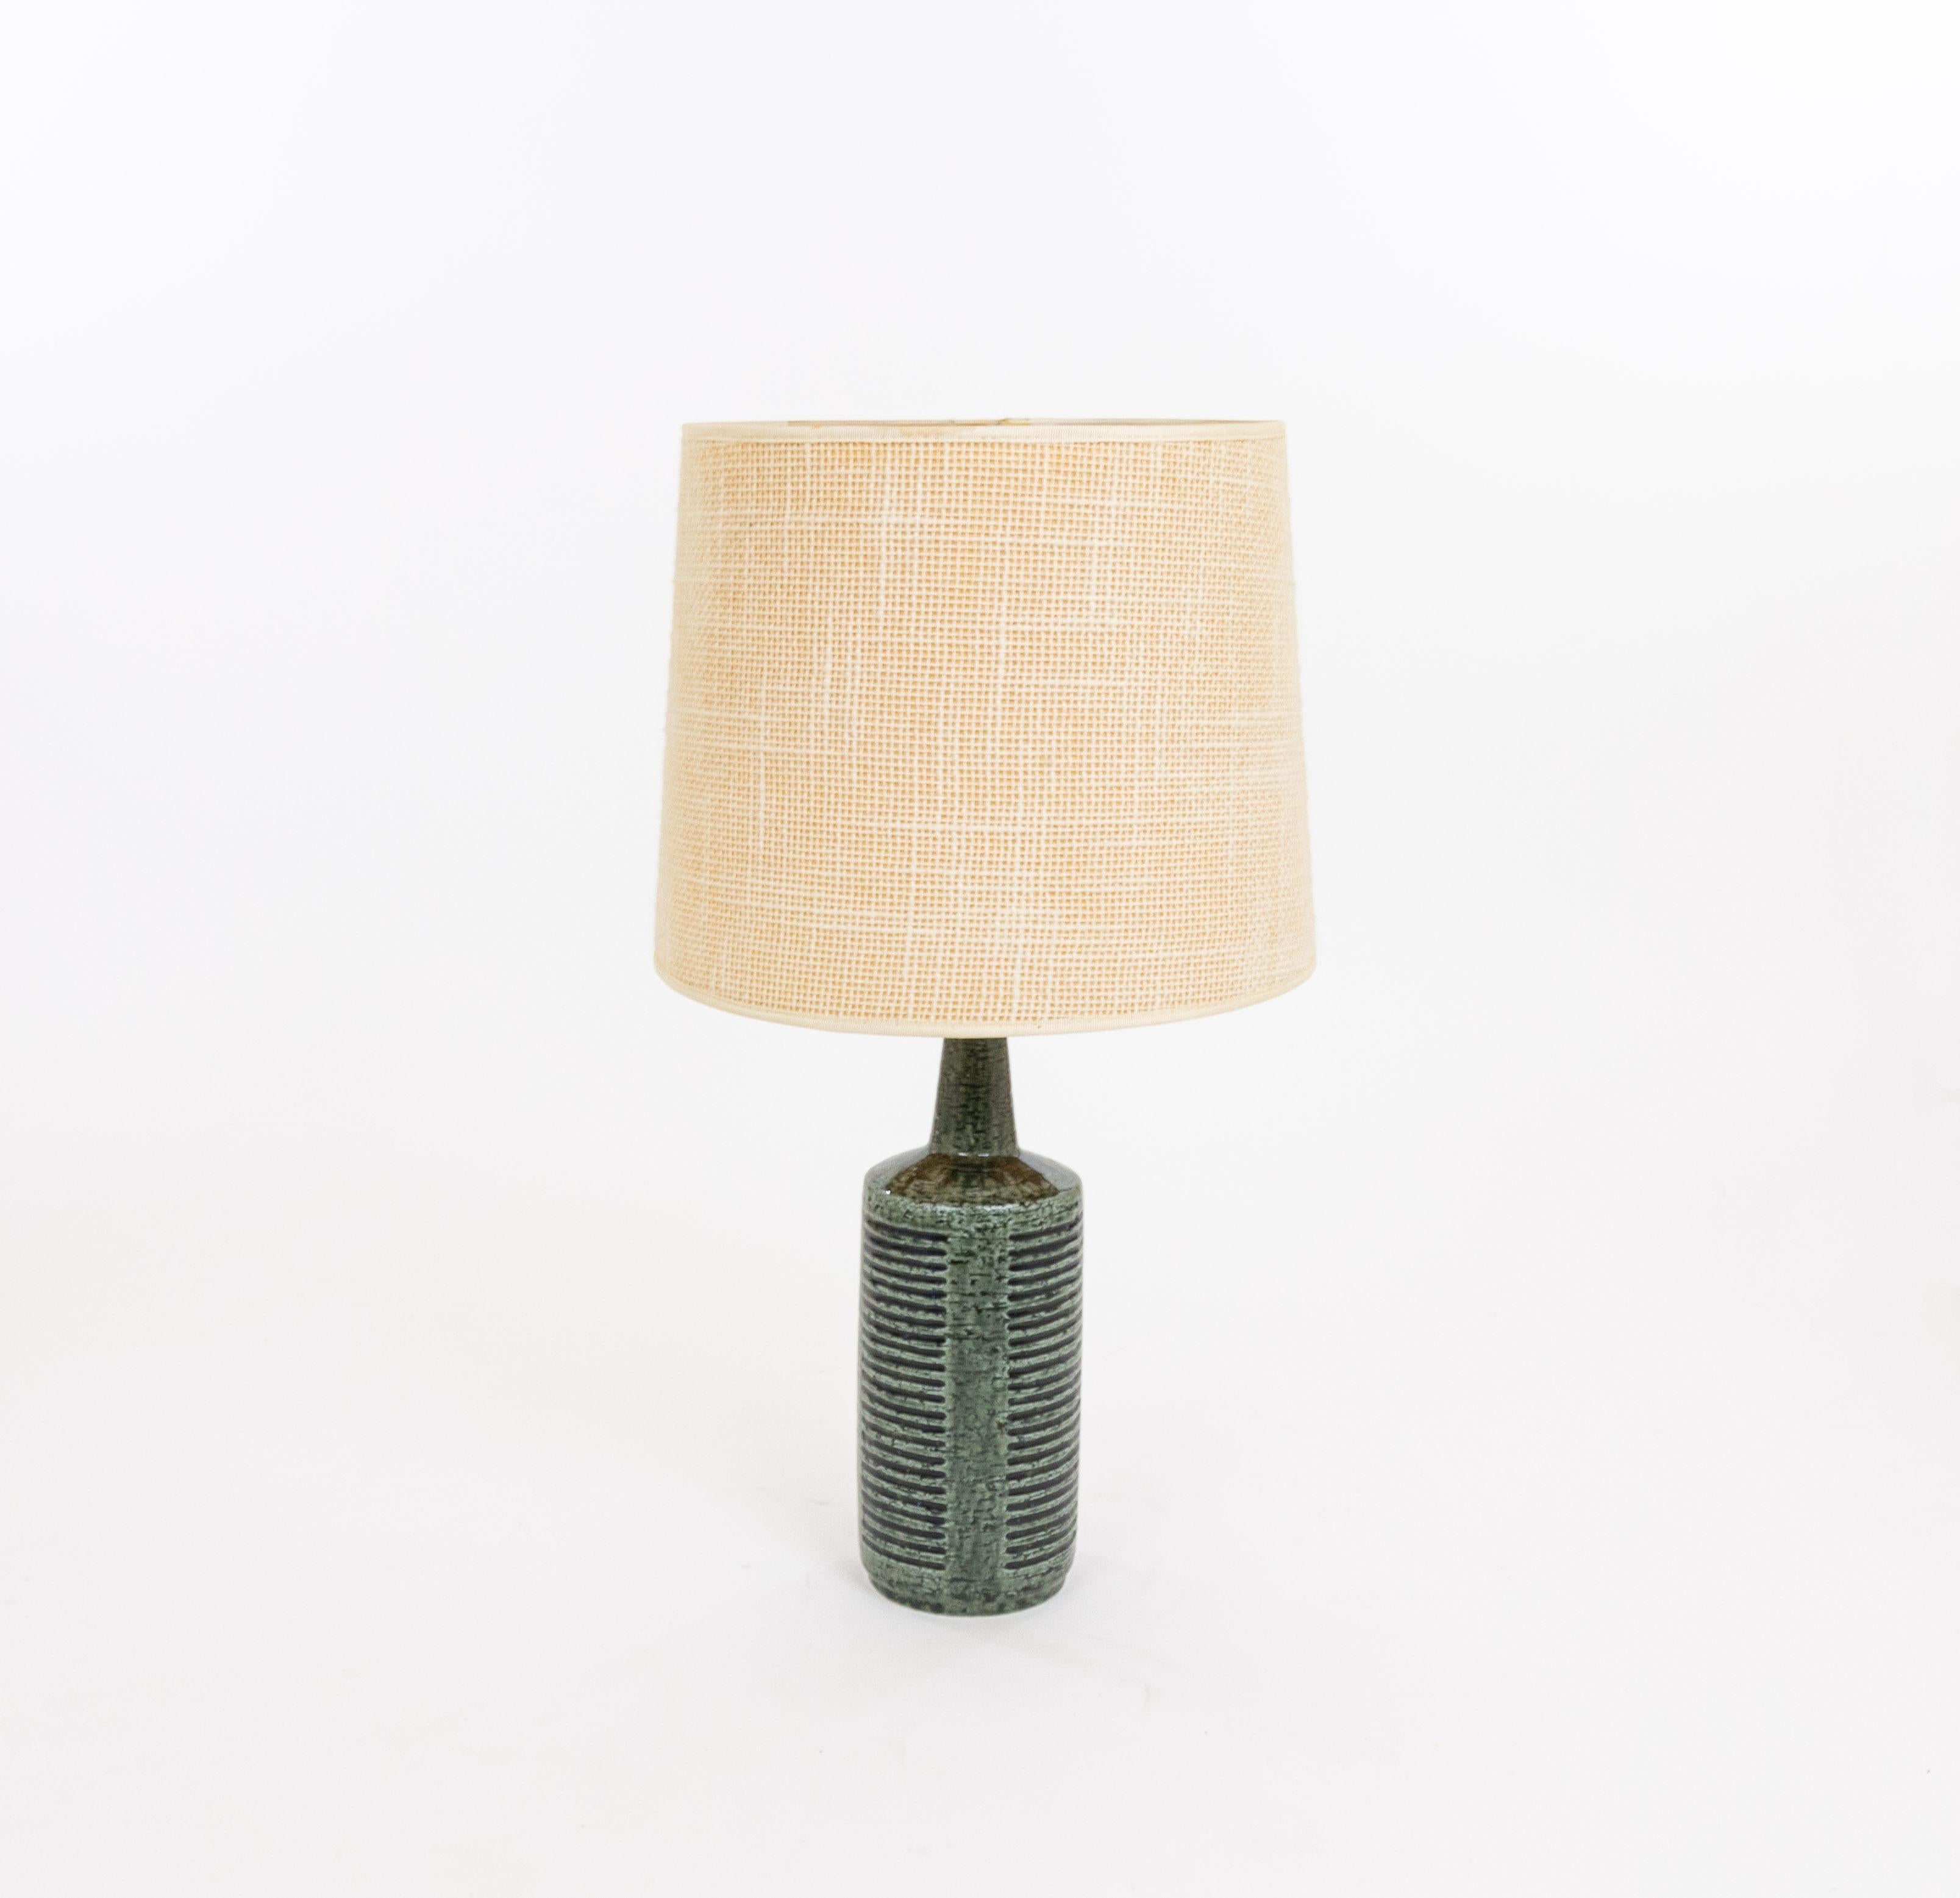 Model DL/30 table lamp made by Annelise and Per Linnemann-Schmidt for Palshus in the 1960s. The colour of the handmade decorated base is Green and Charcoal. It has impressed, geometric patterns.

The lamp comes with its original lampshade holder.